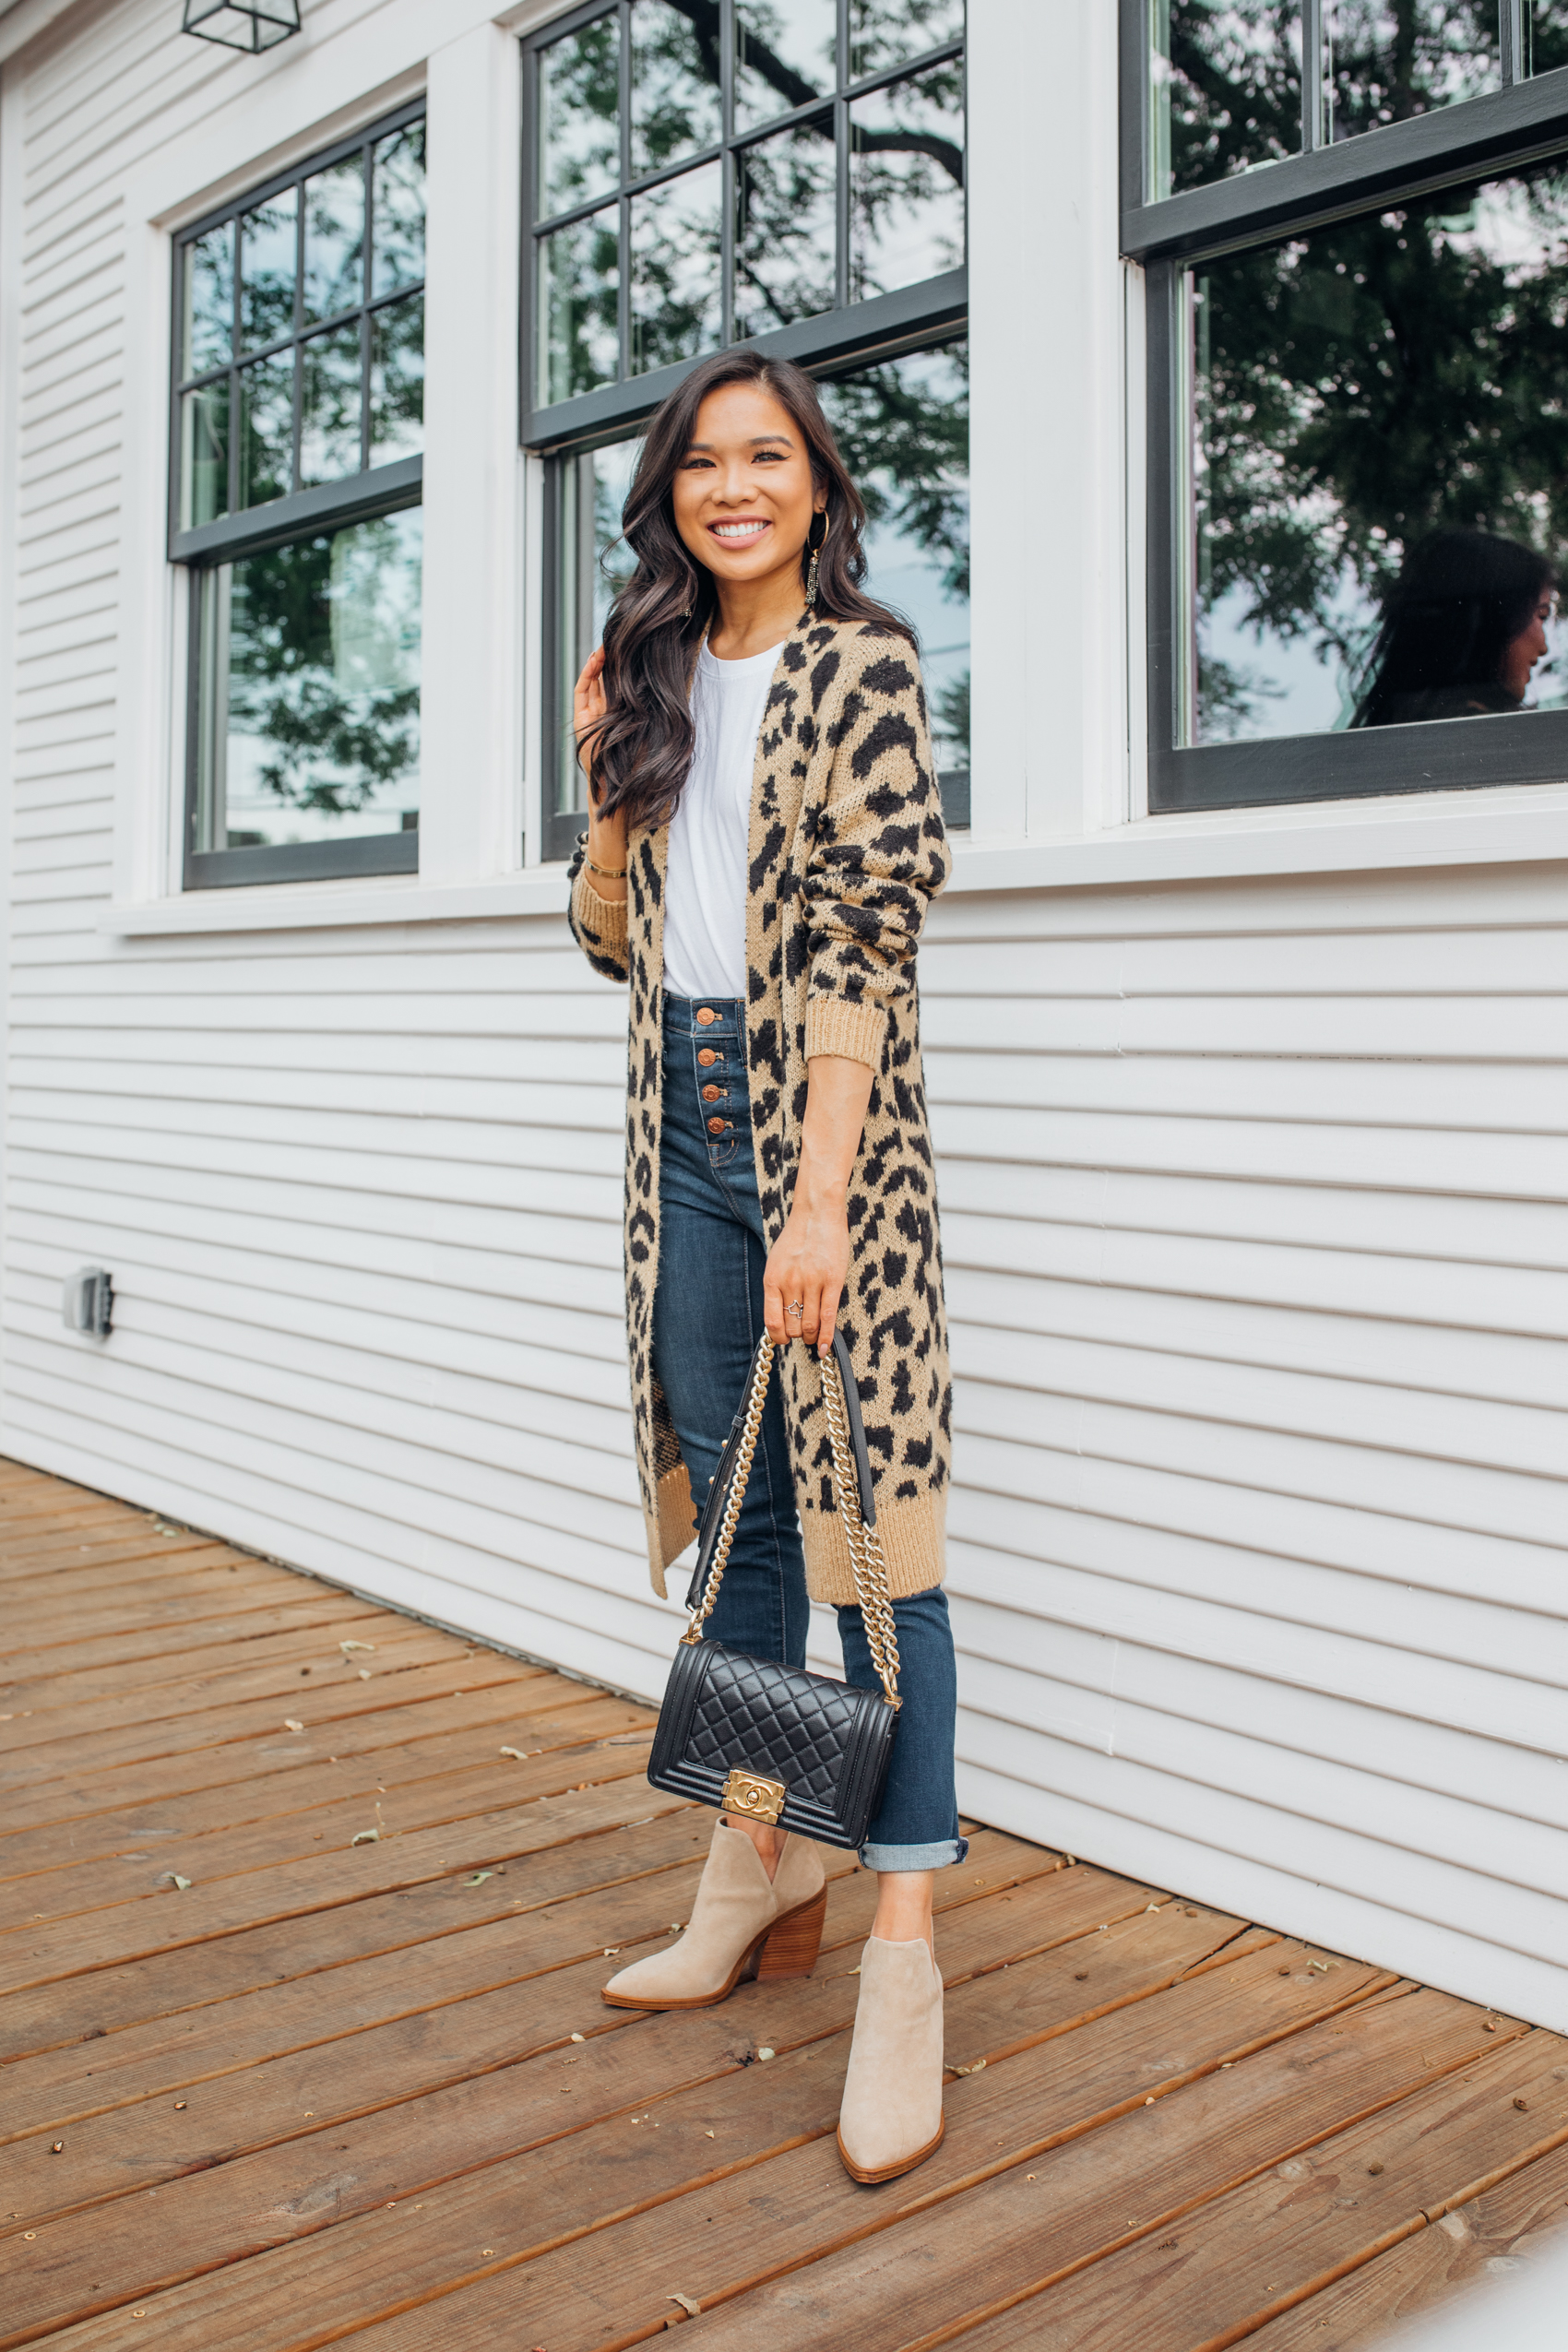 How to style a leopard cardigan outfit for fall with booties